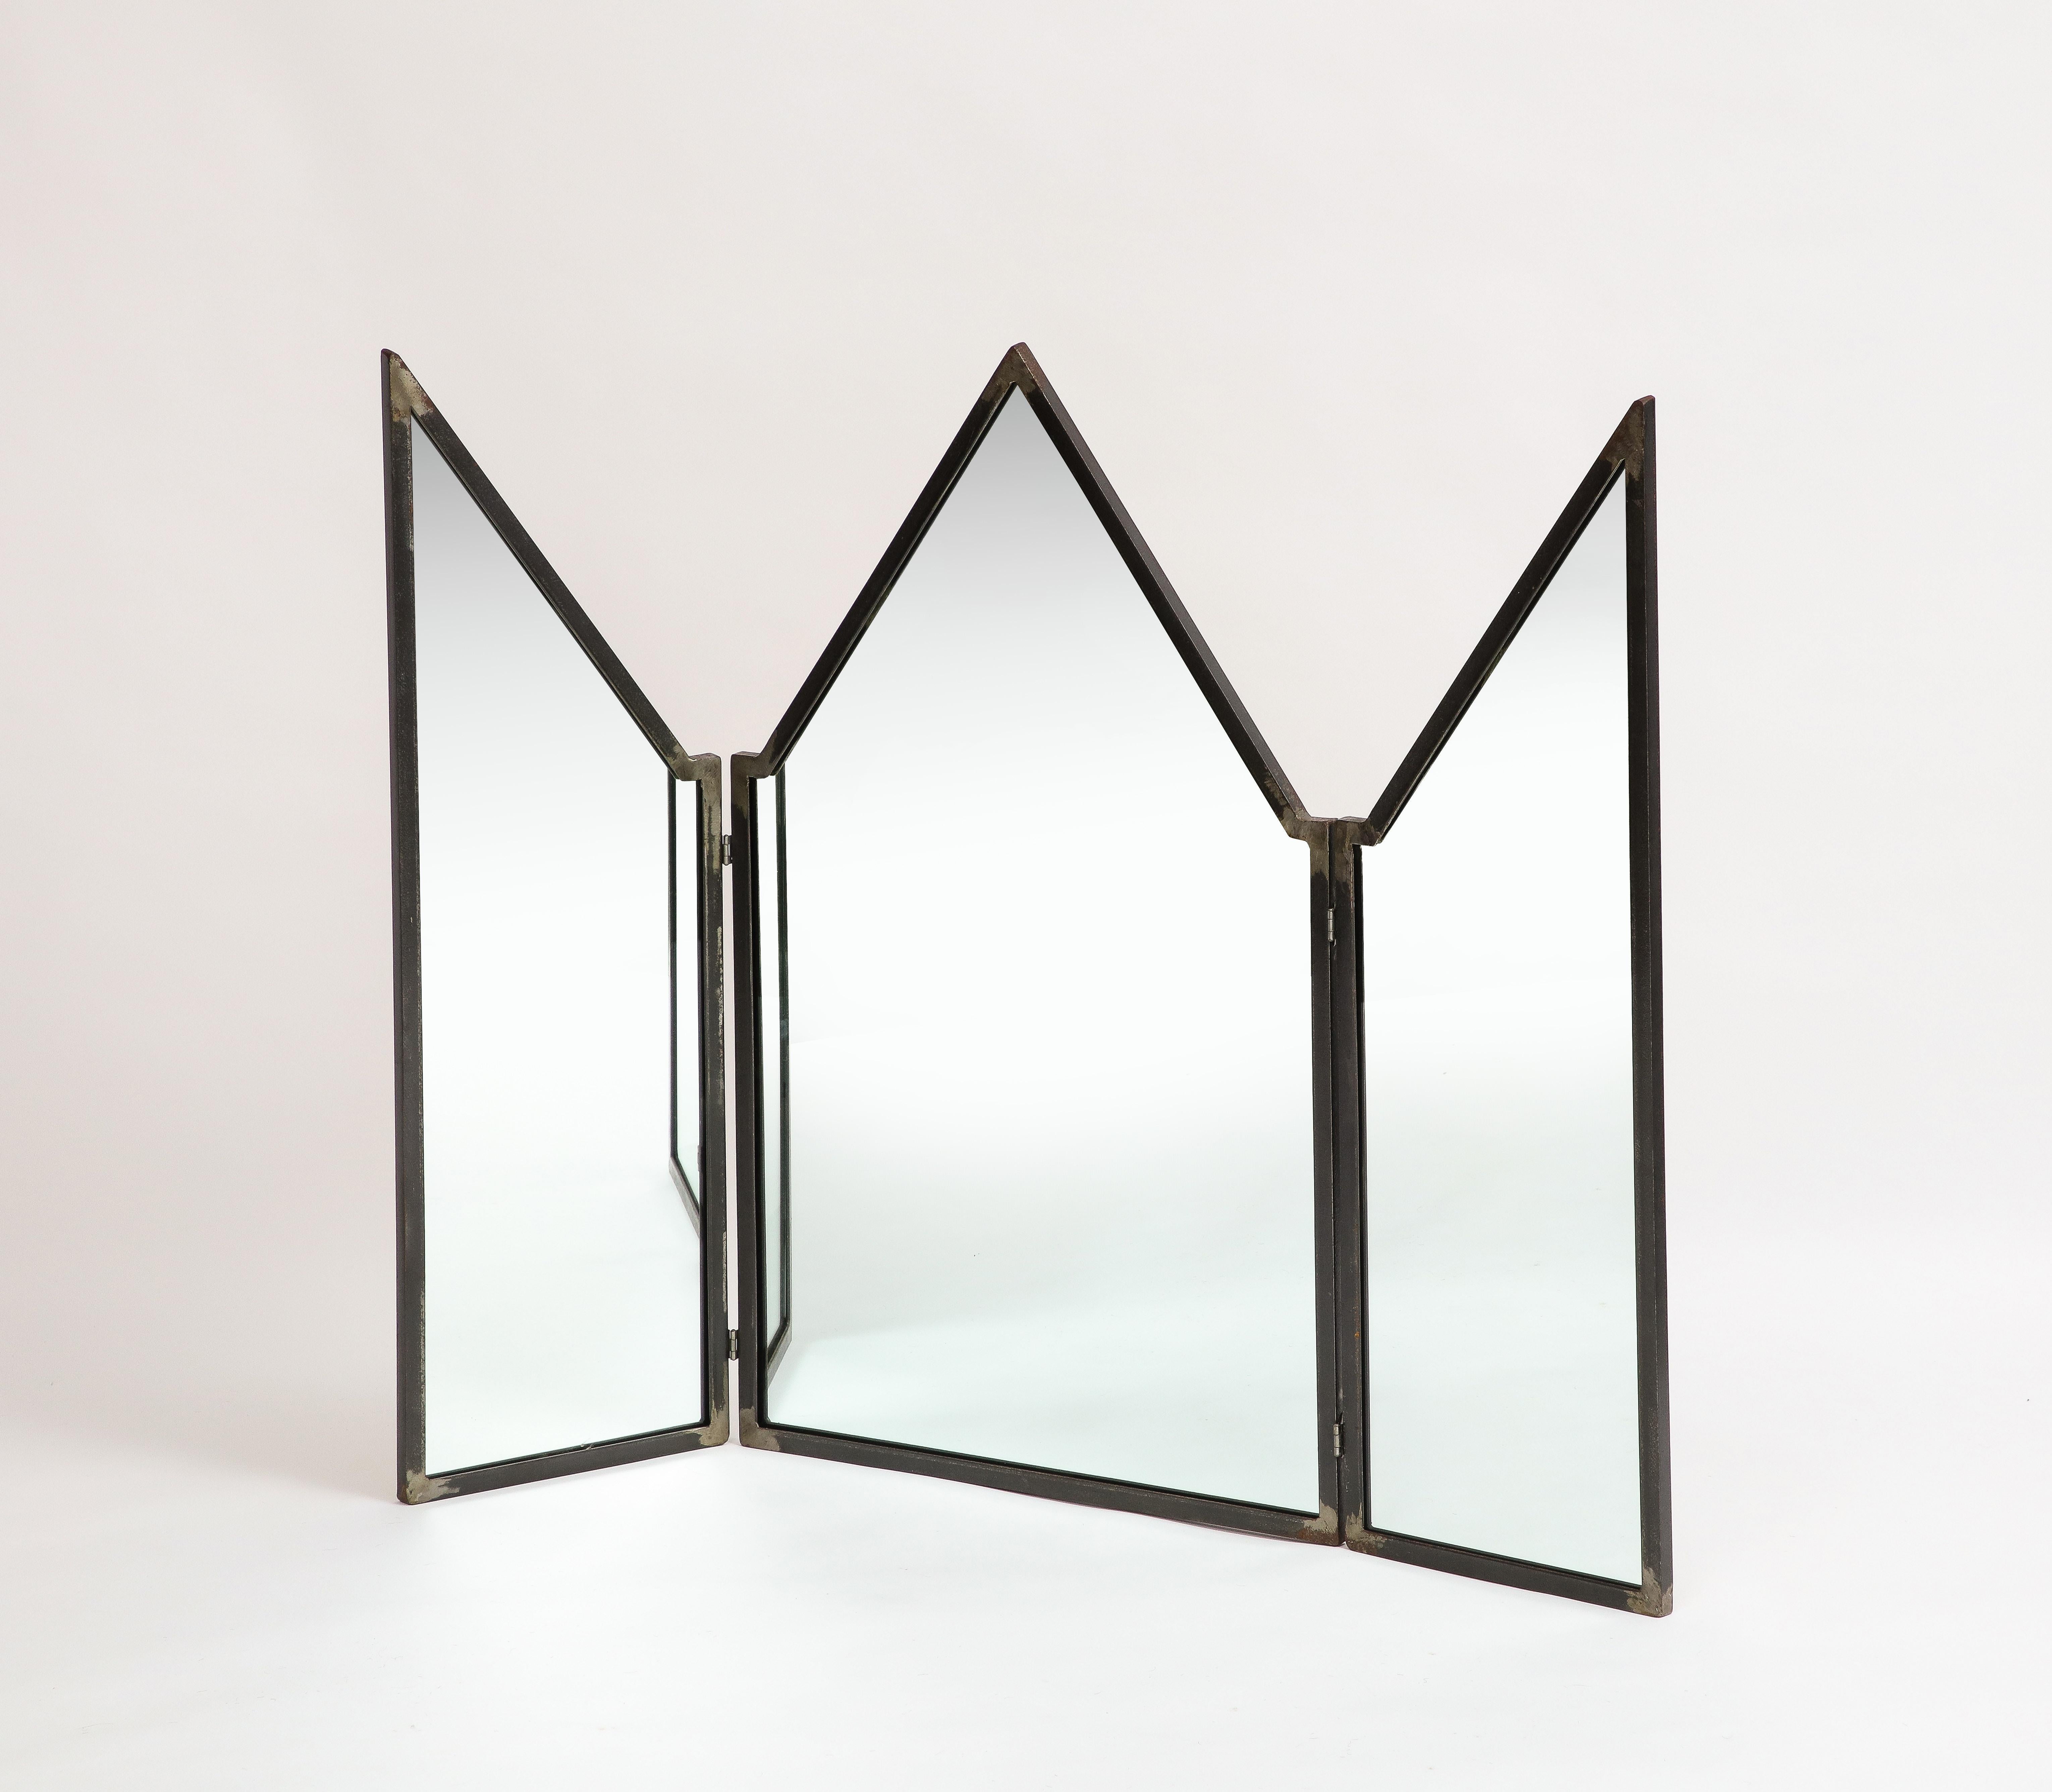 Modern patinated iron folding mirror by Mario Villa (1953-2021), from his estate. The mirror is three pedimented panels with peaked tops. The mirror and wood backing are newly replaced in 2022. 

Measures: 39